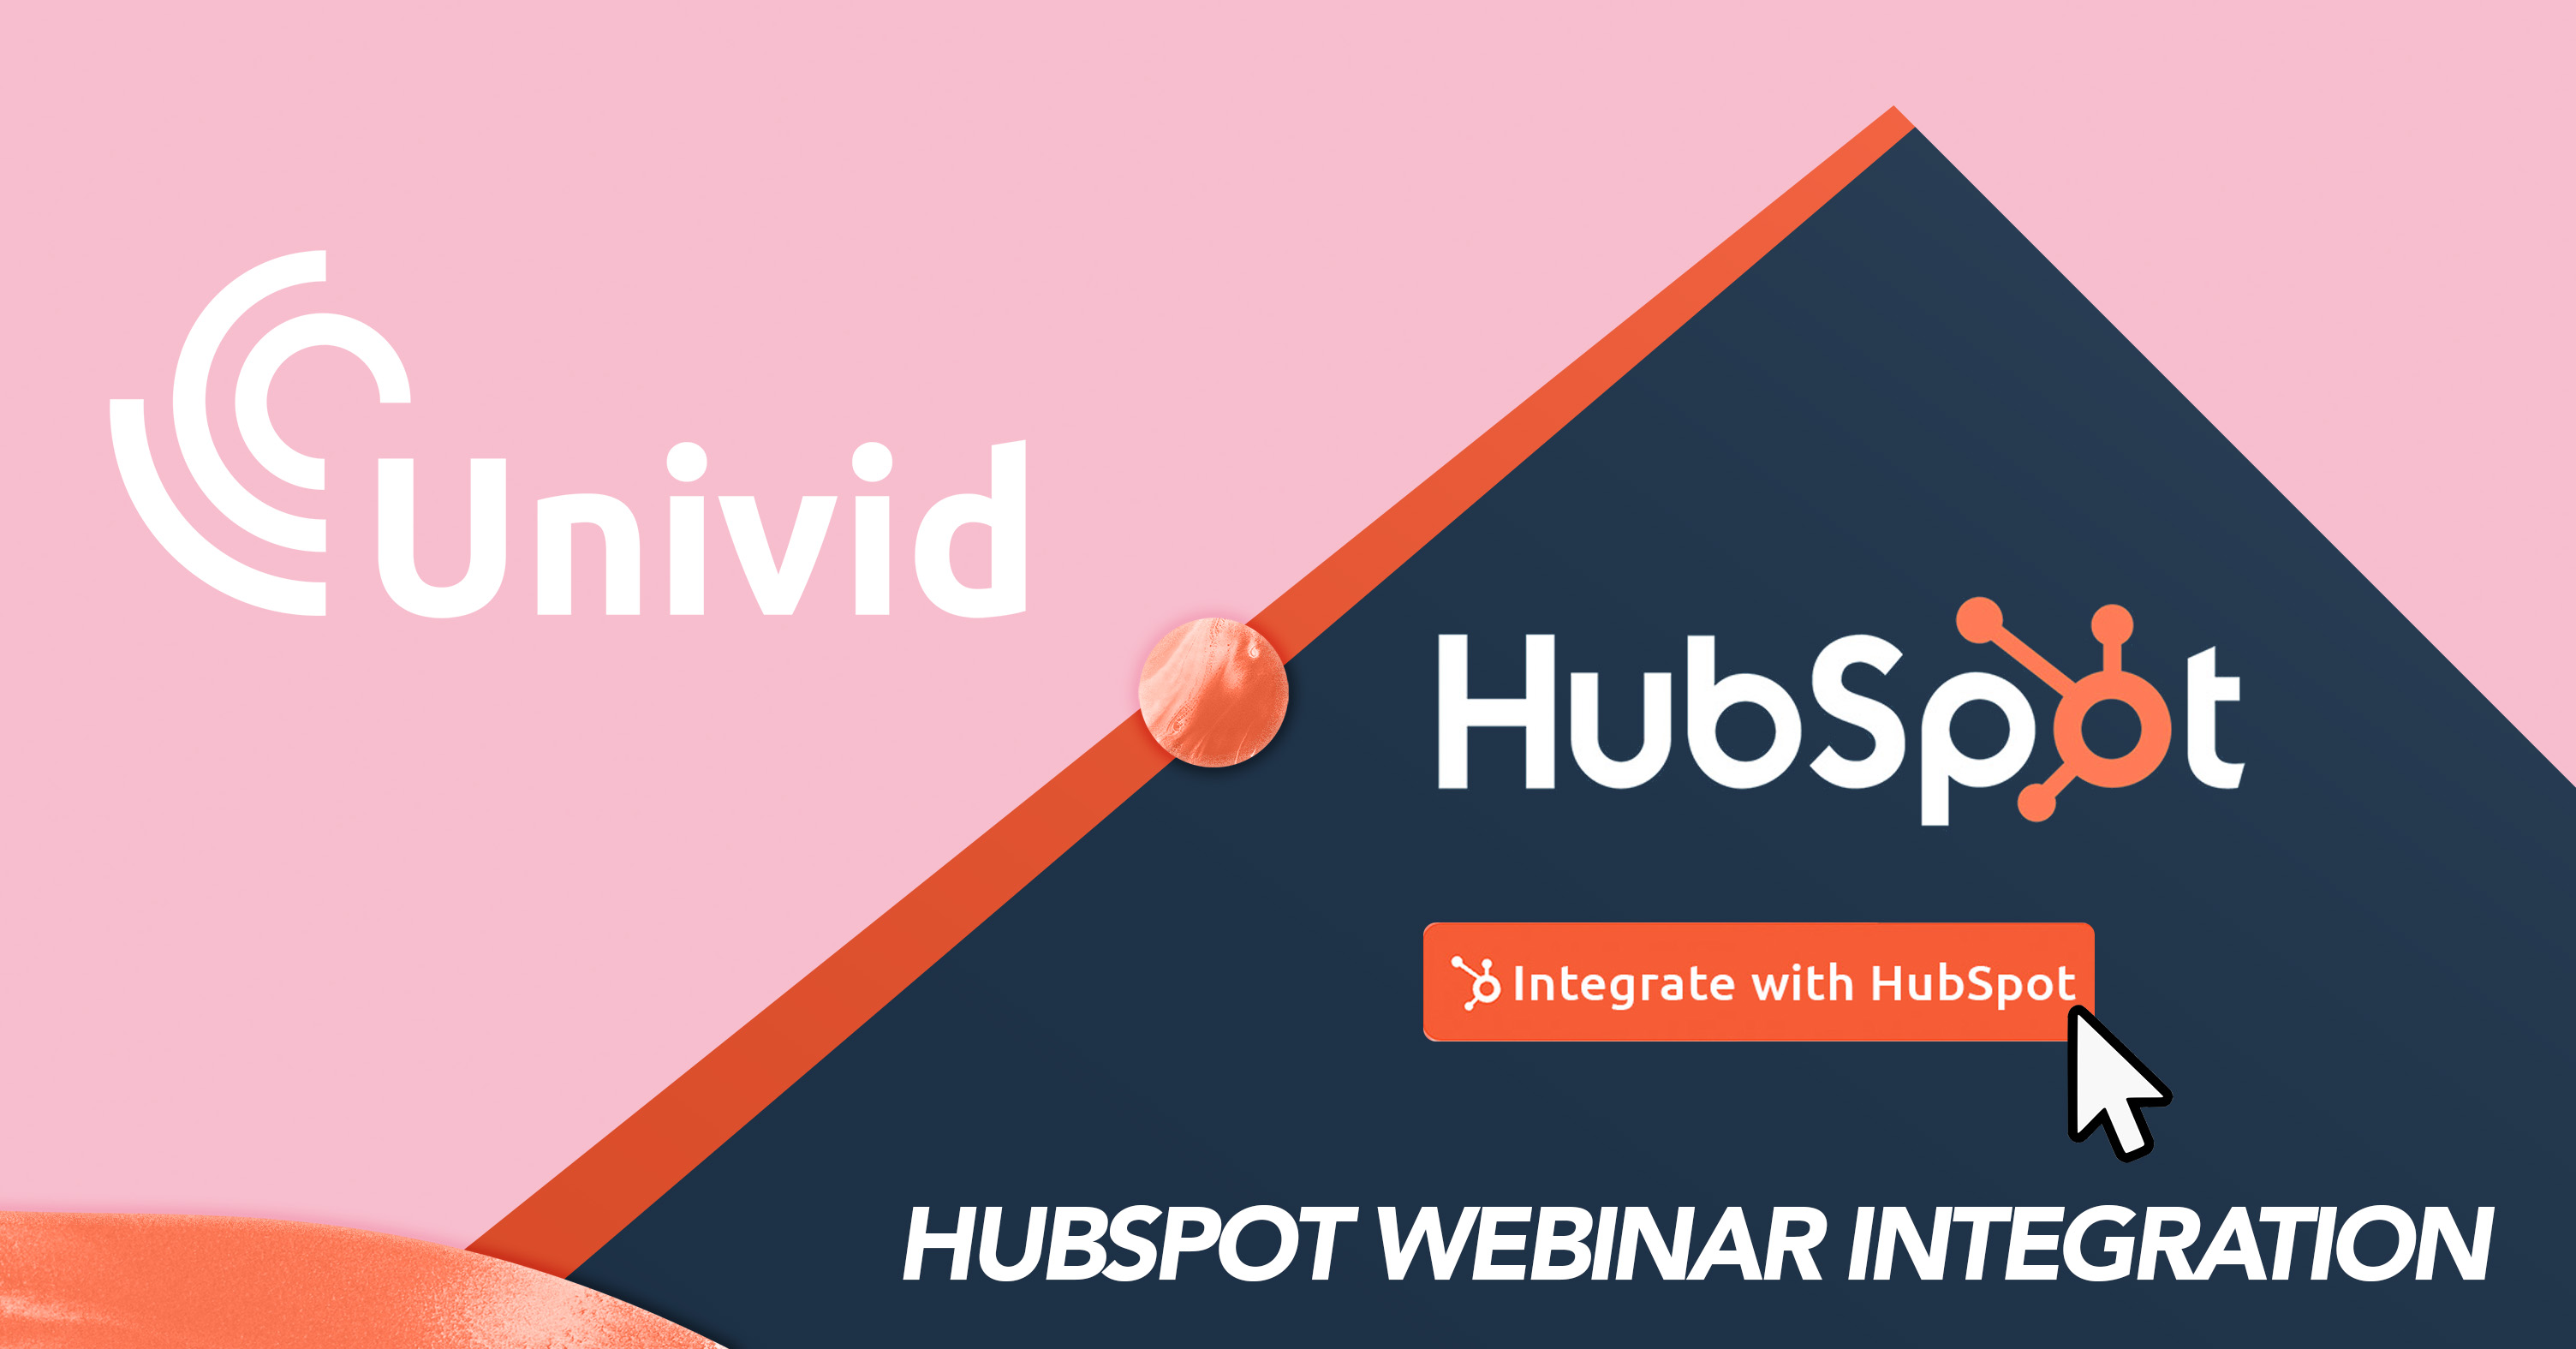 Connect your Univid webinars with HubSpot CRM - through this HubSpot webinar integration. Use your own HubSpot forms for webinar registration. Get engagement insights on contact level into your CRM.